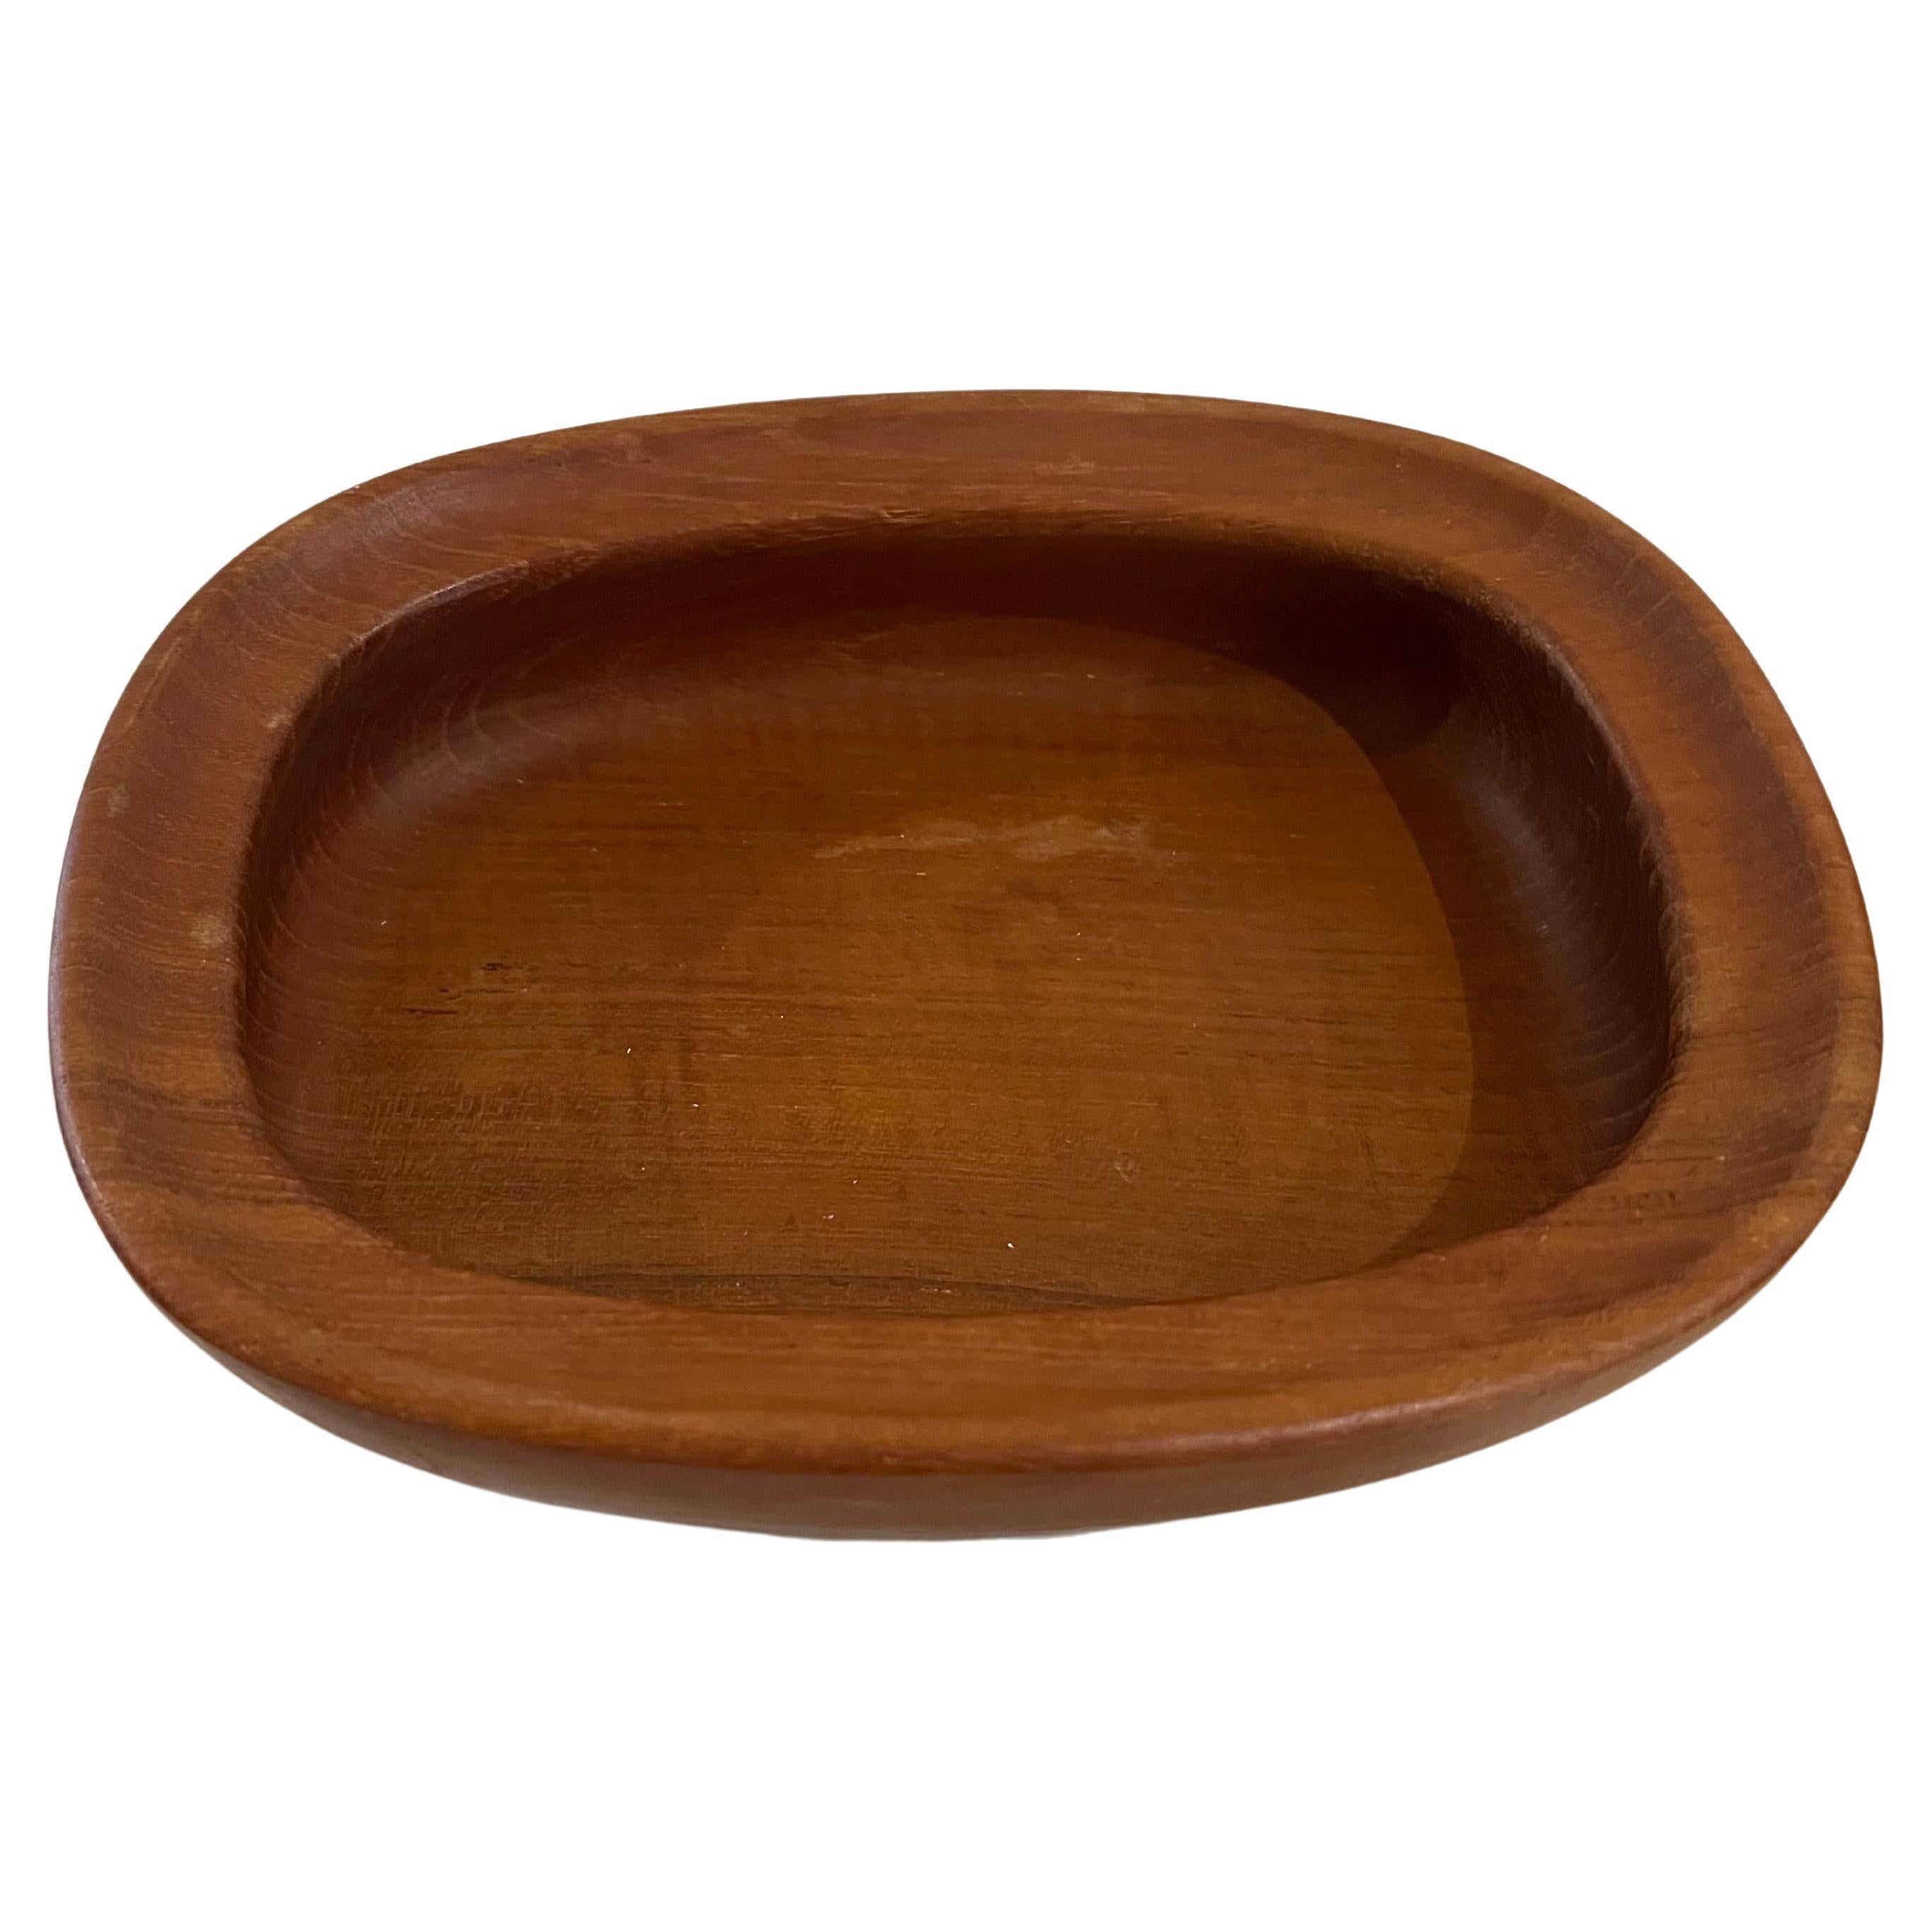 Beautiful solid teak Danish modern bowl . catch it all made by Nissen circa 1970's beautiful condition.